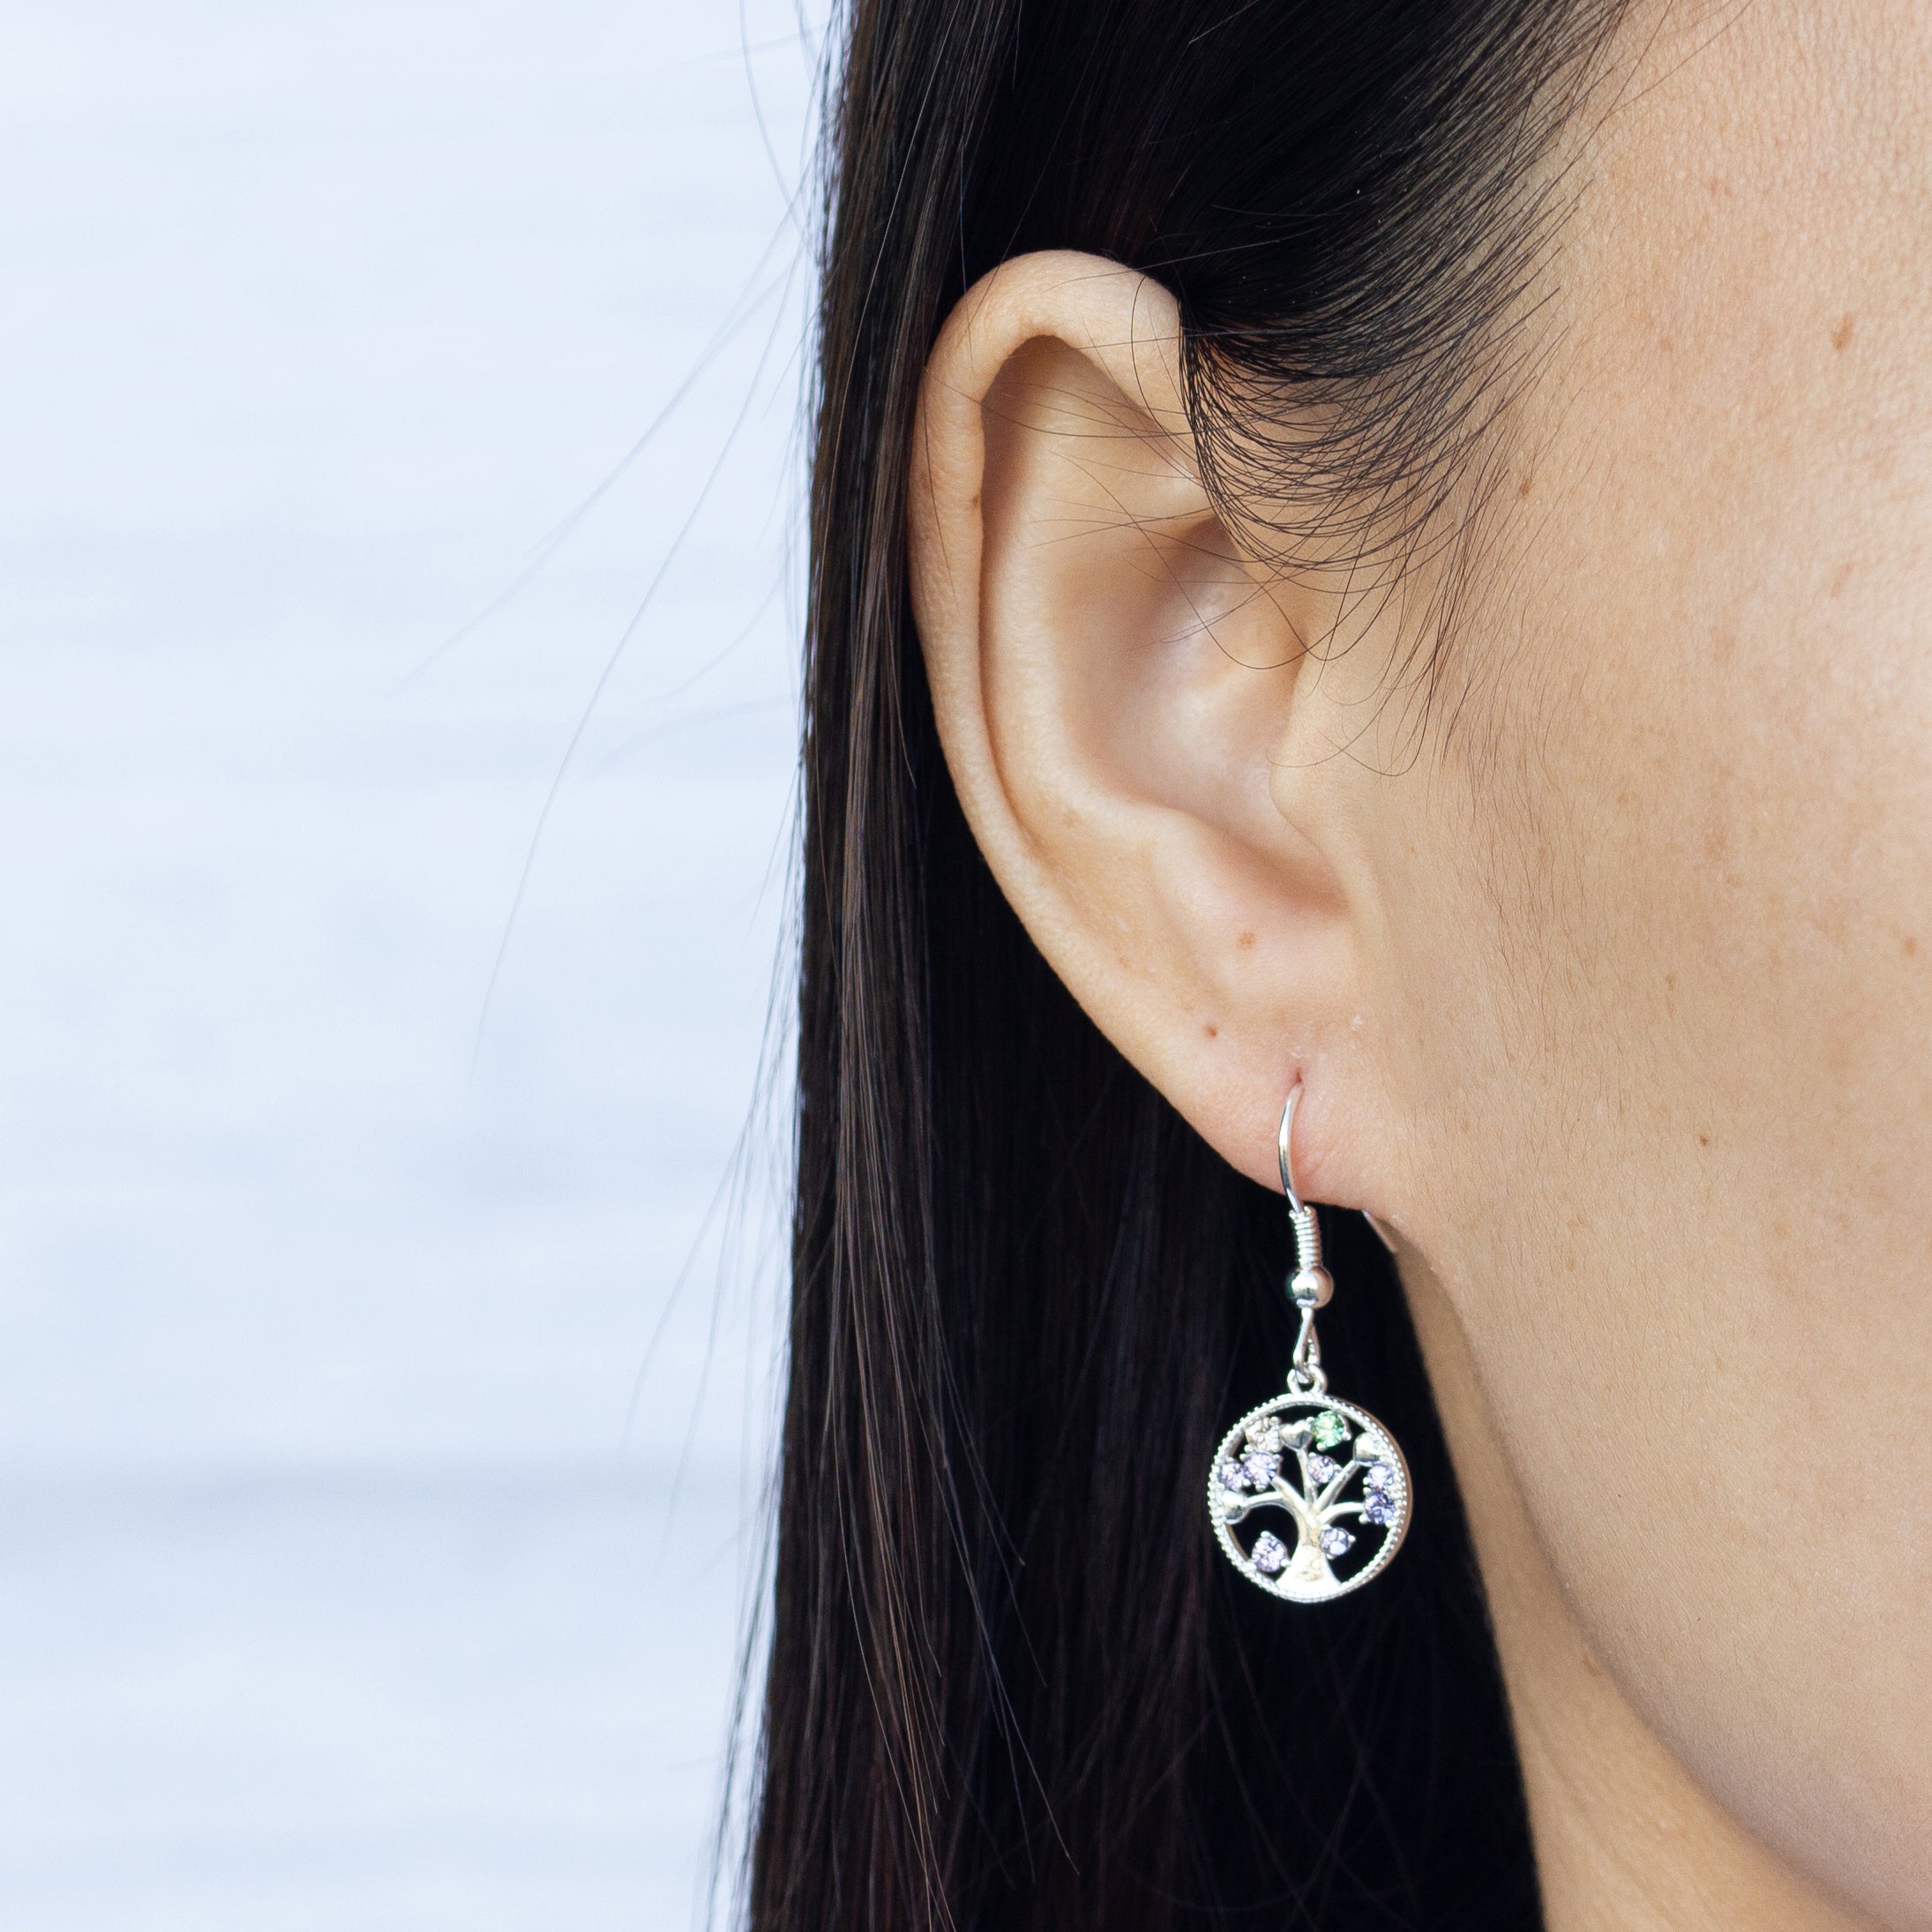 Silver Plated Chakra Tree of Life Drop Earrings Created with Crystals from Zircondia®